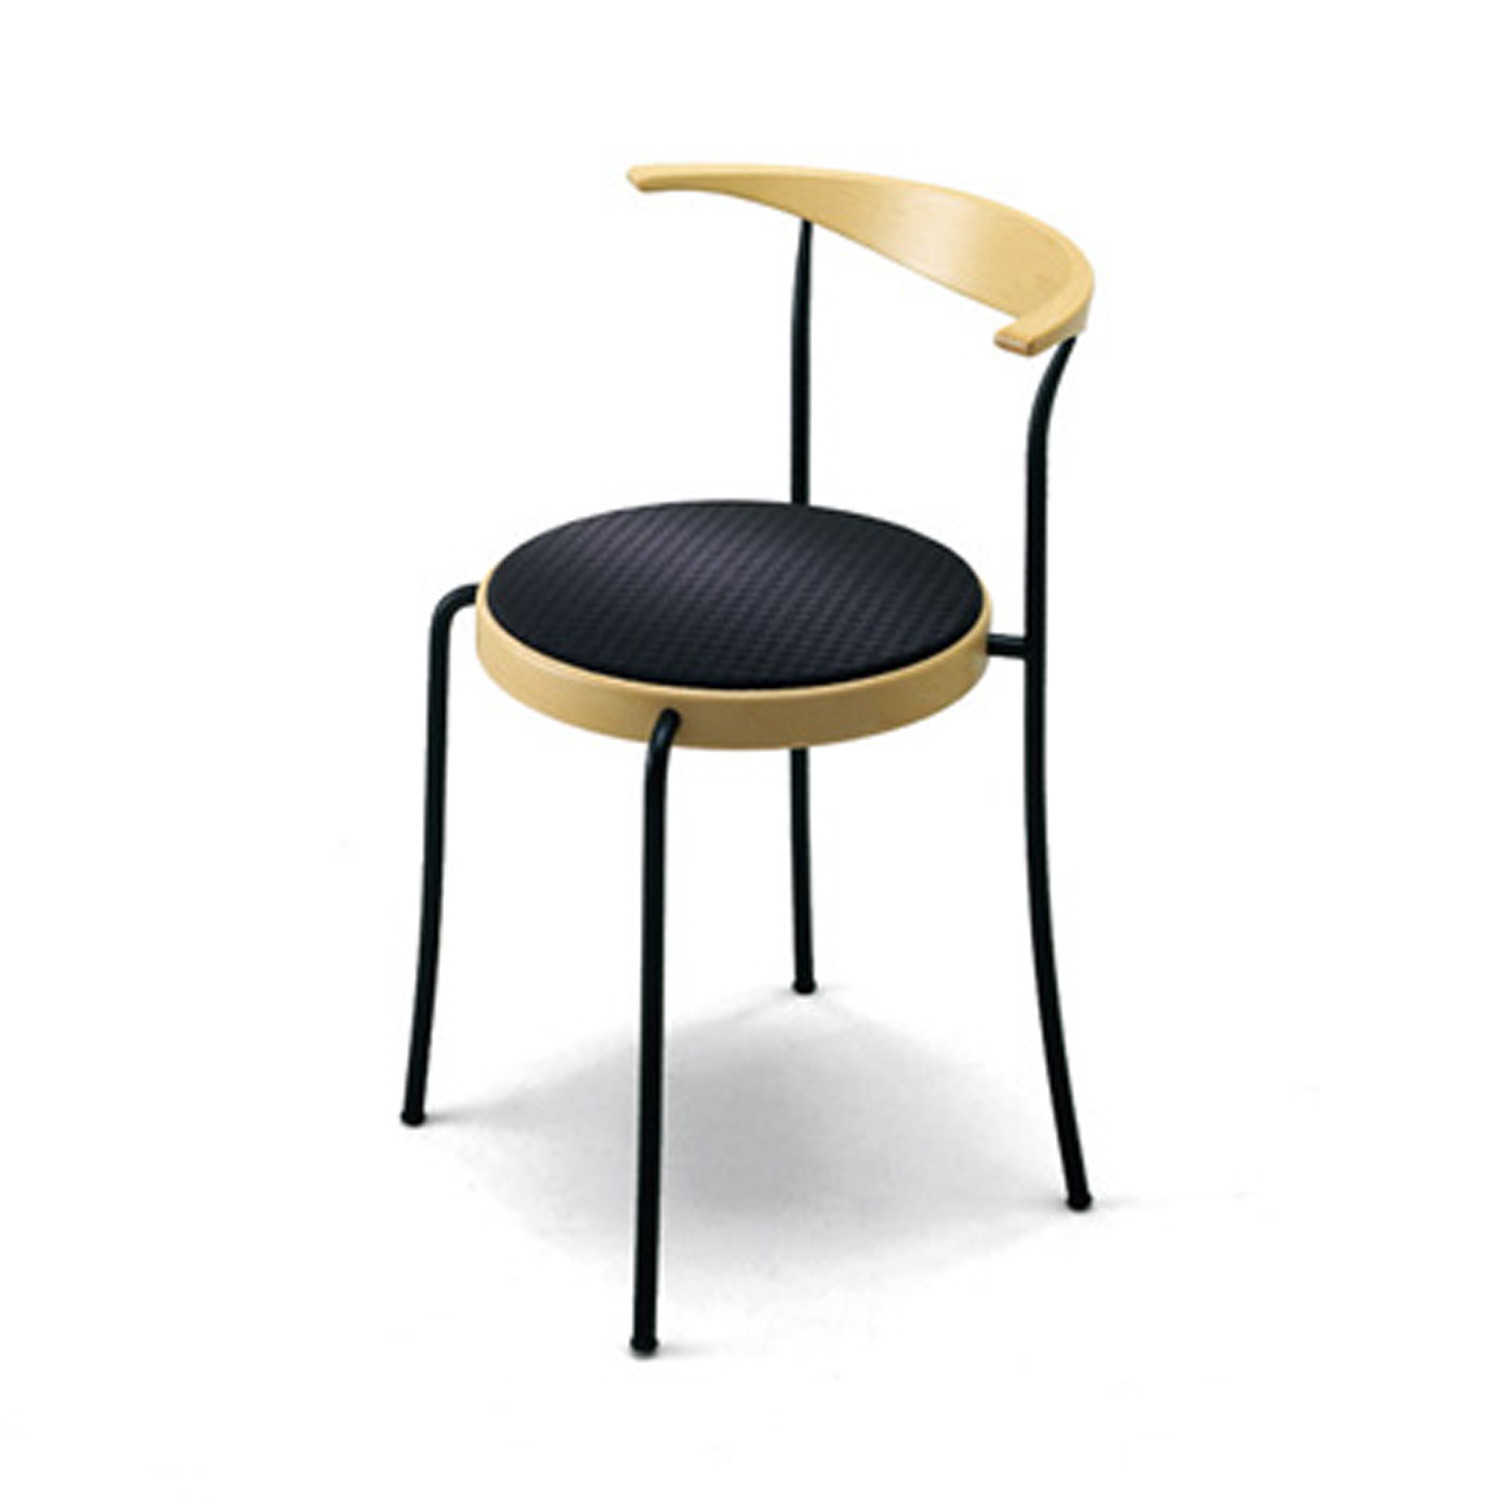 Partout Chairs